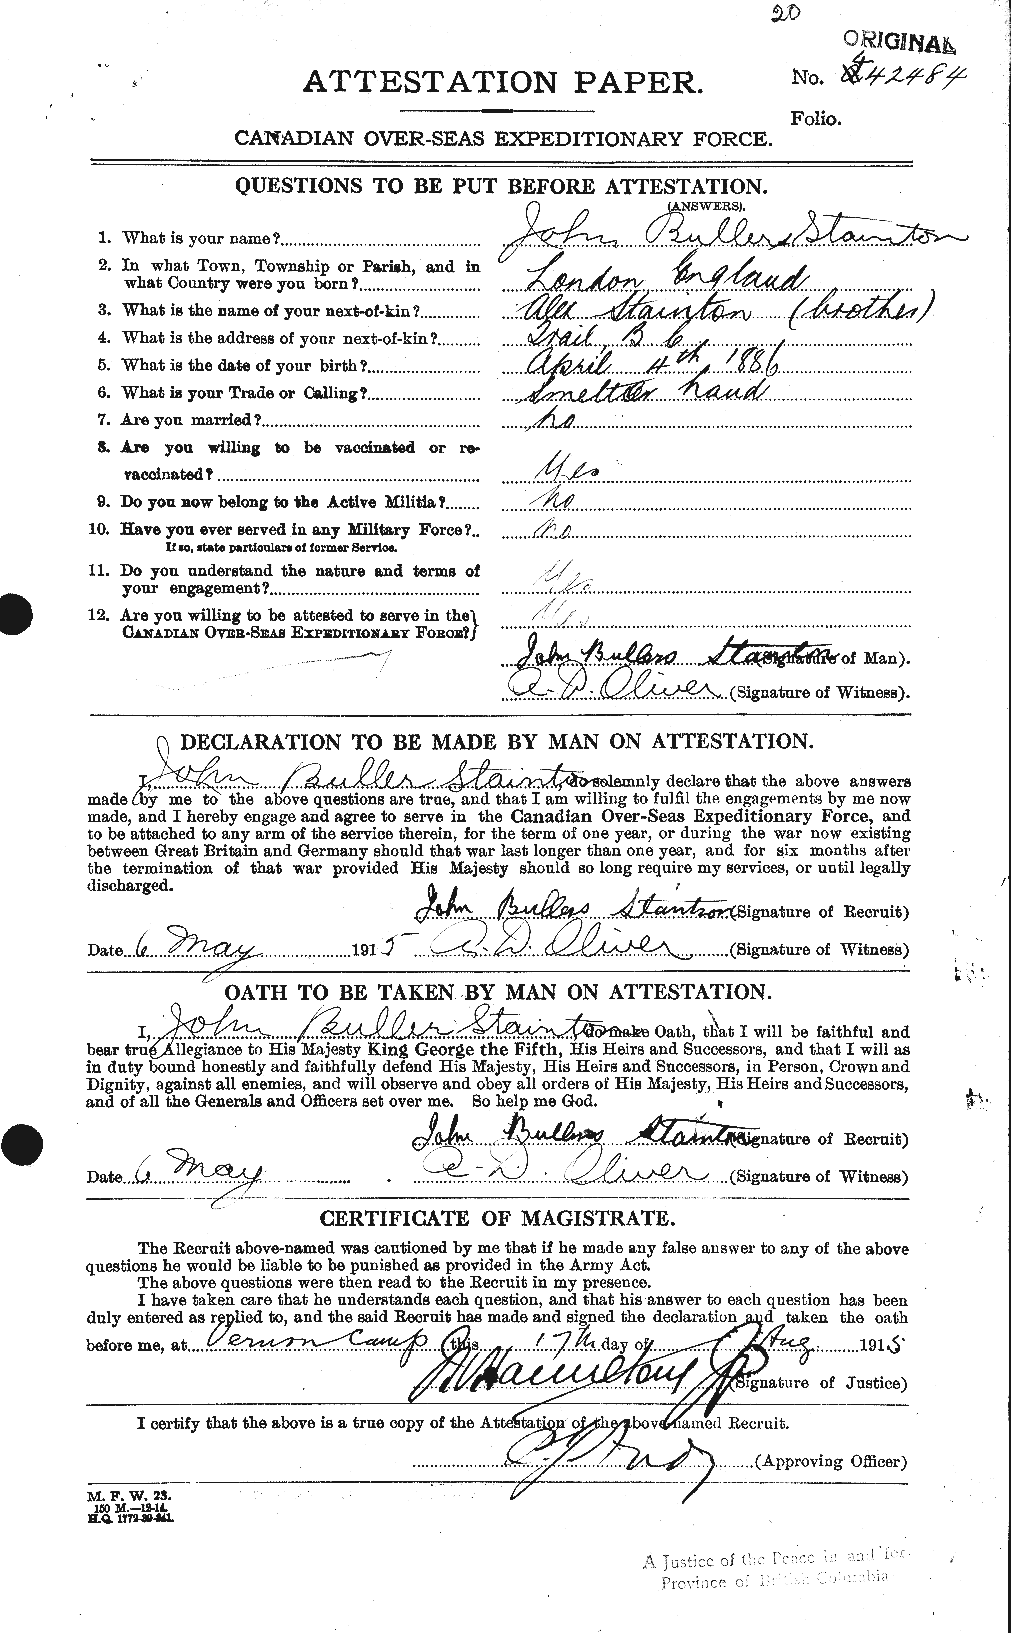 Personnel Records of the First World War - CEF 116829a